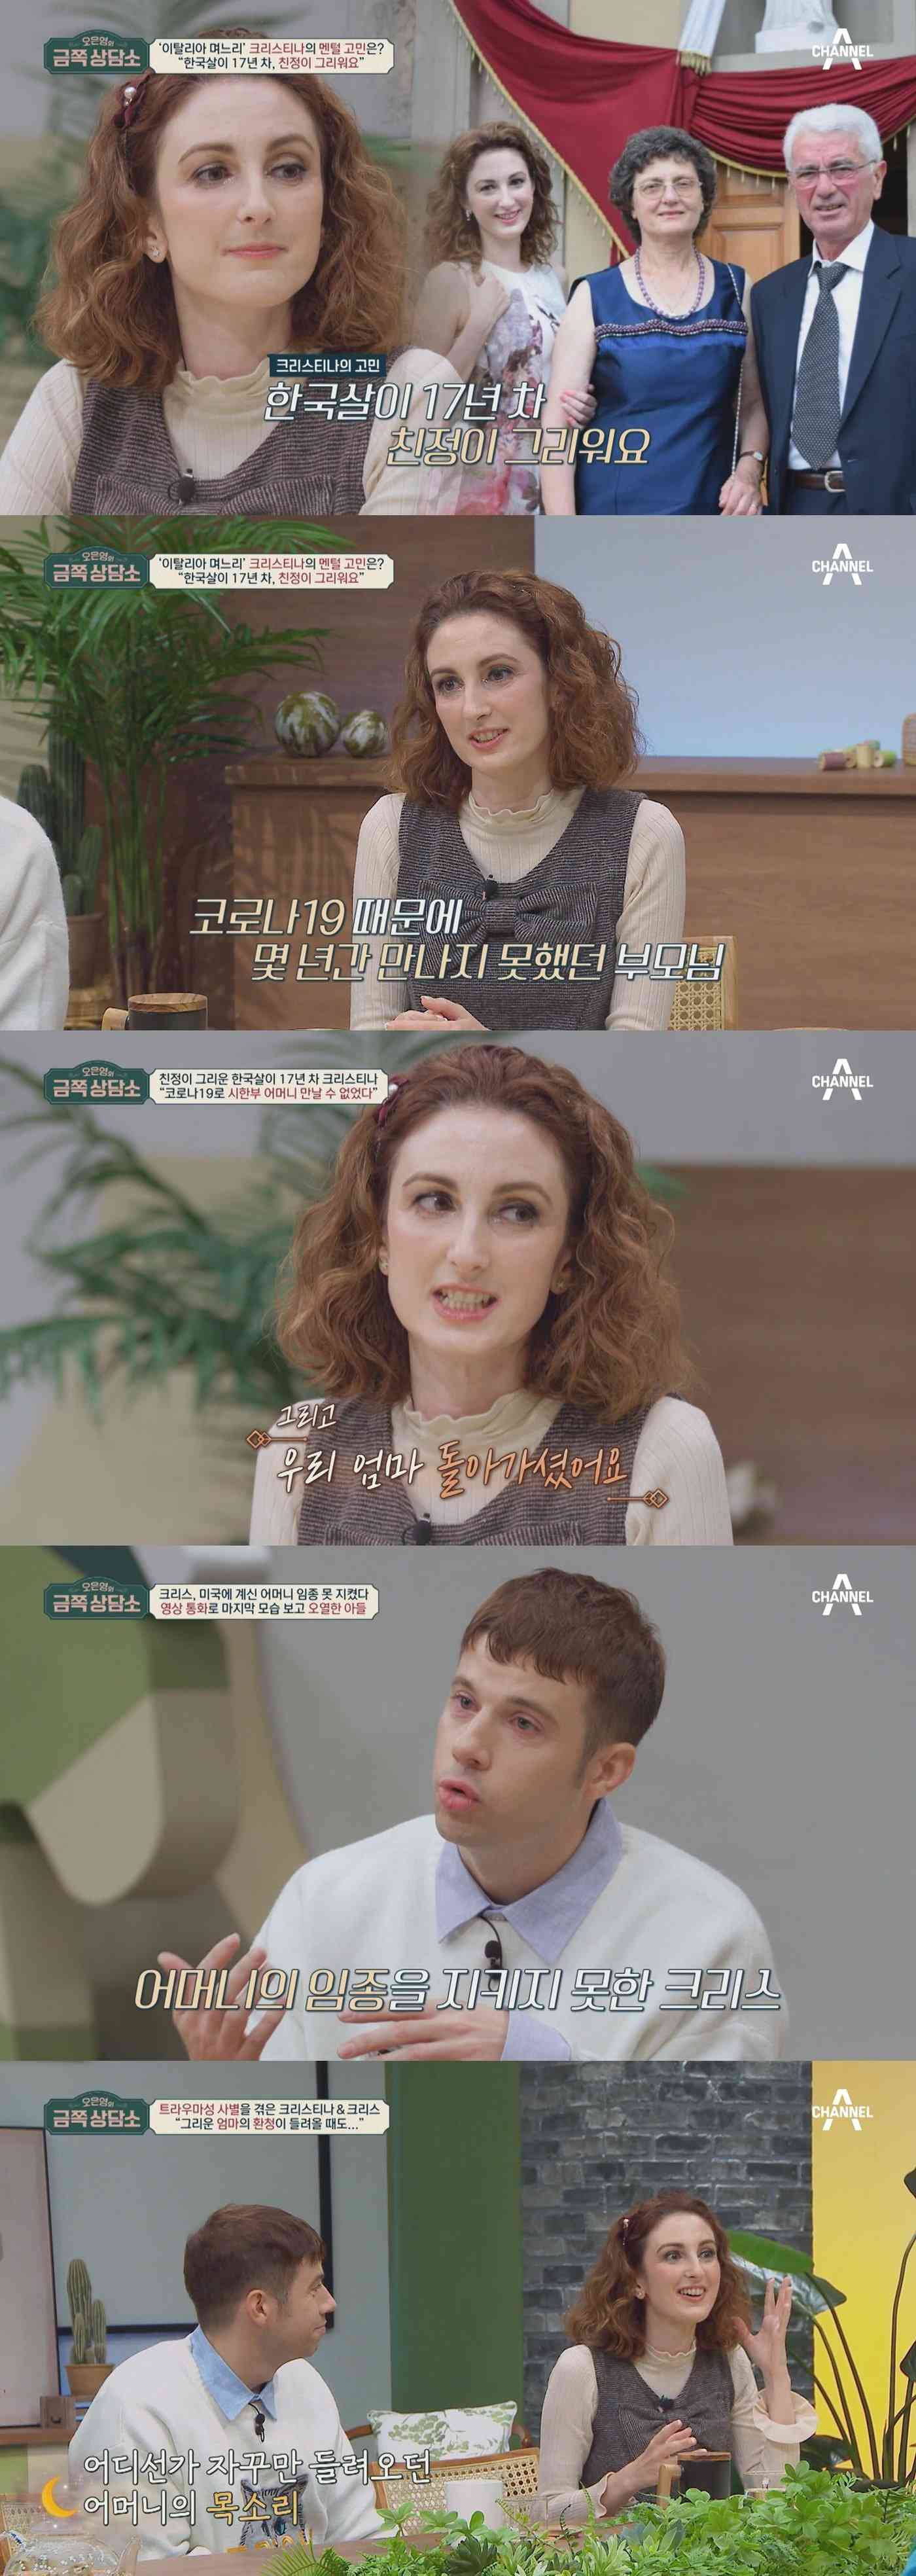 Longing for Lost Mothers: Christina and Chris’s Heartfelt Stories on ‘Oh Eun-young’s Golden Counseling Center’